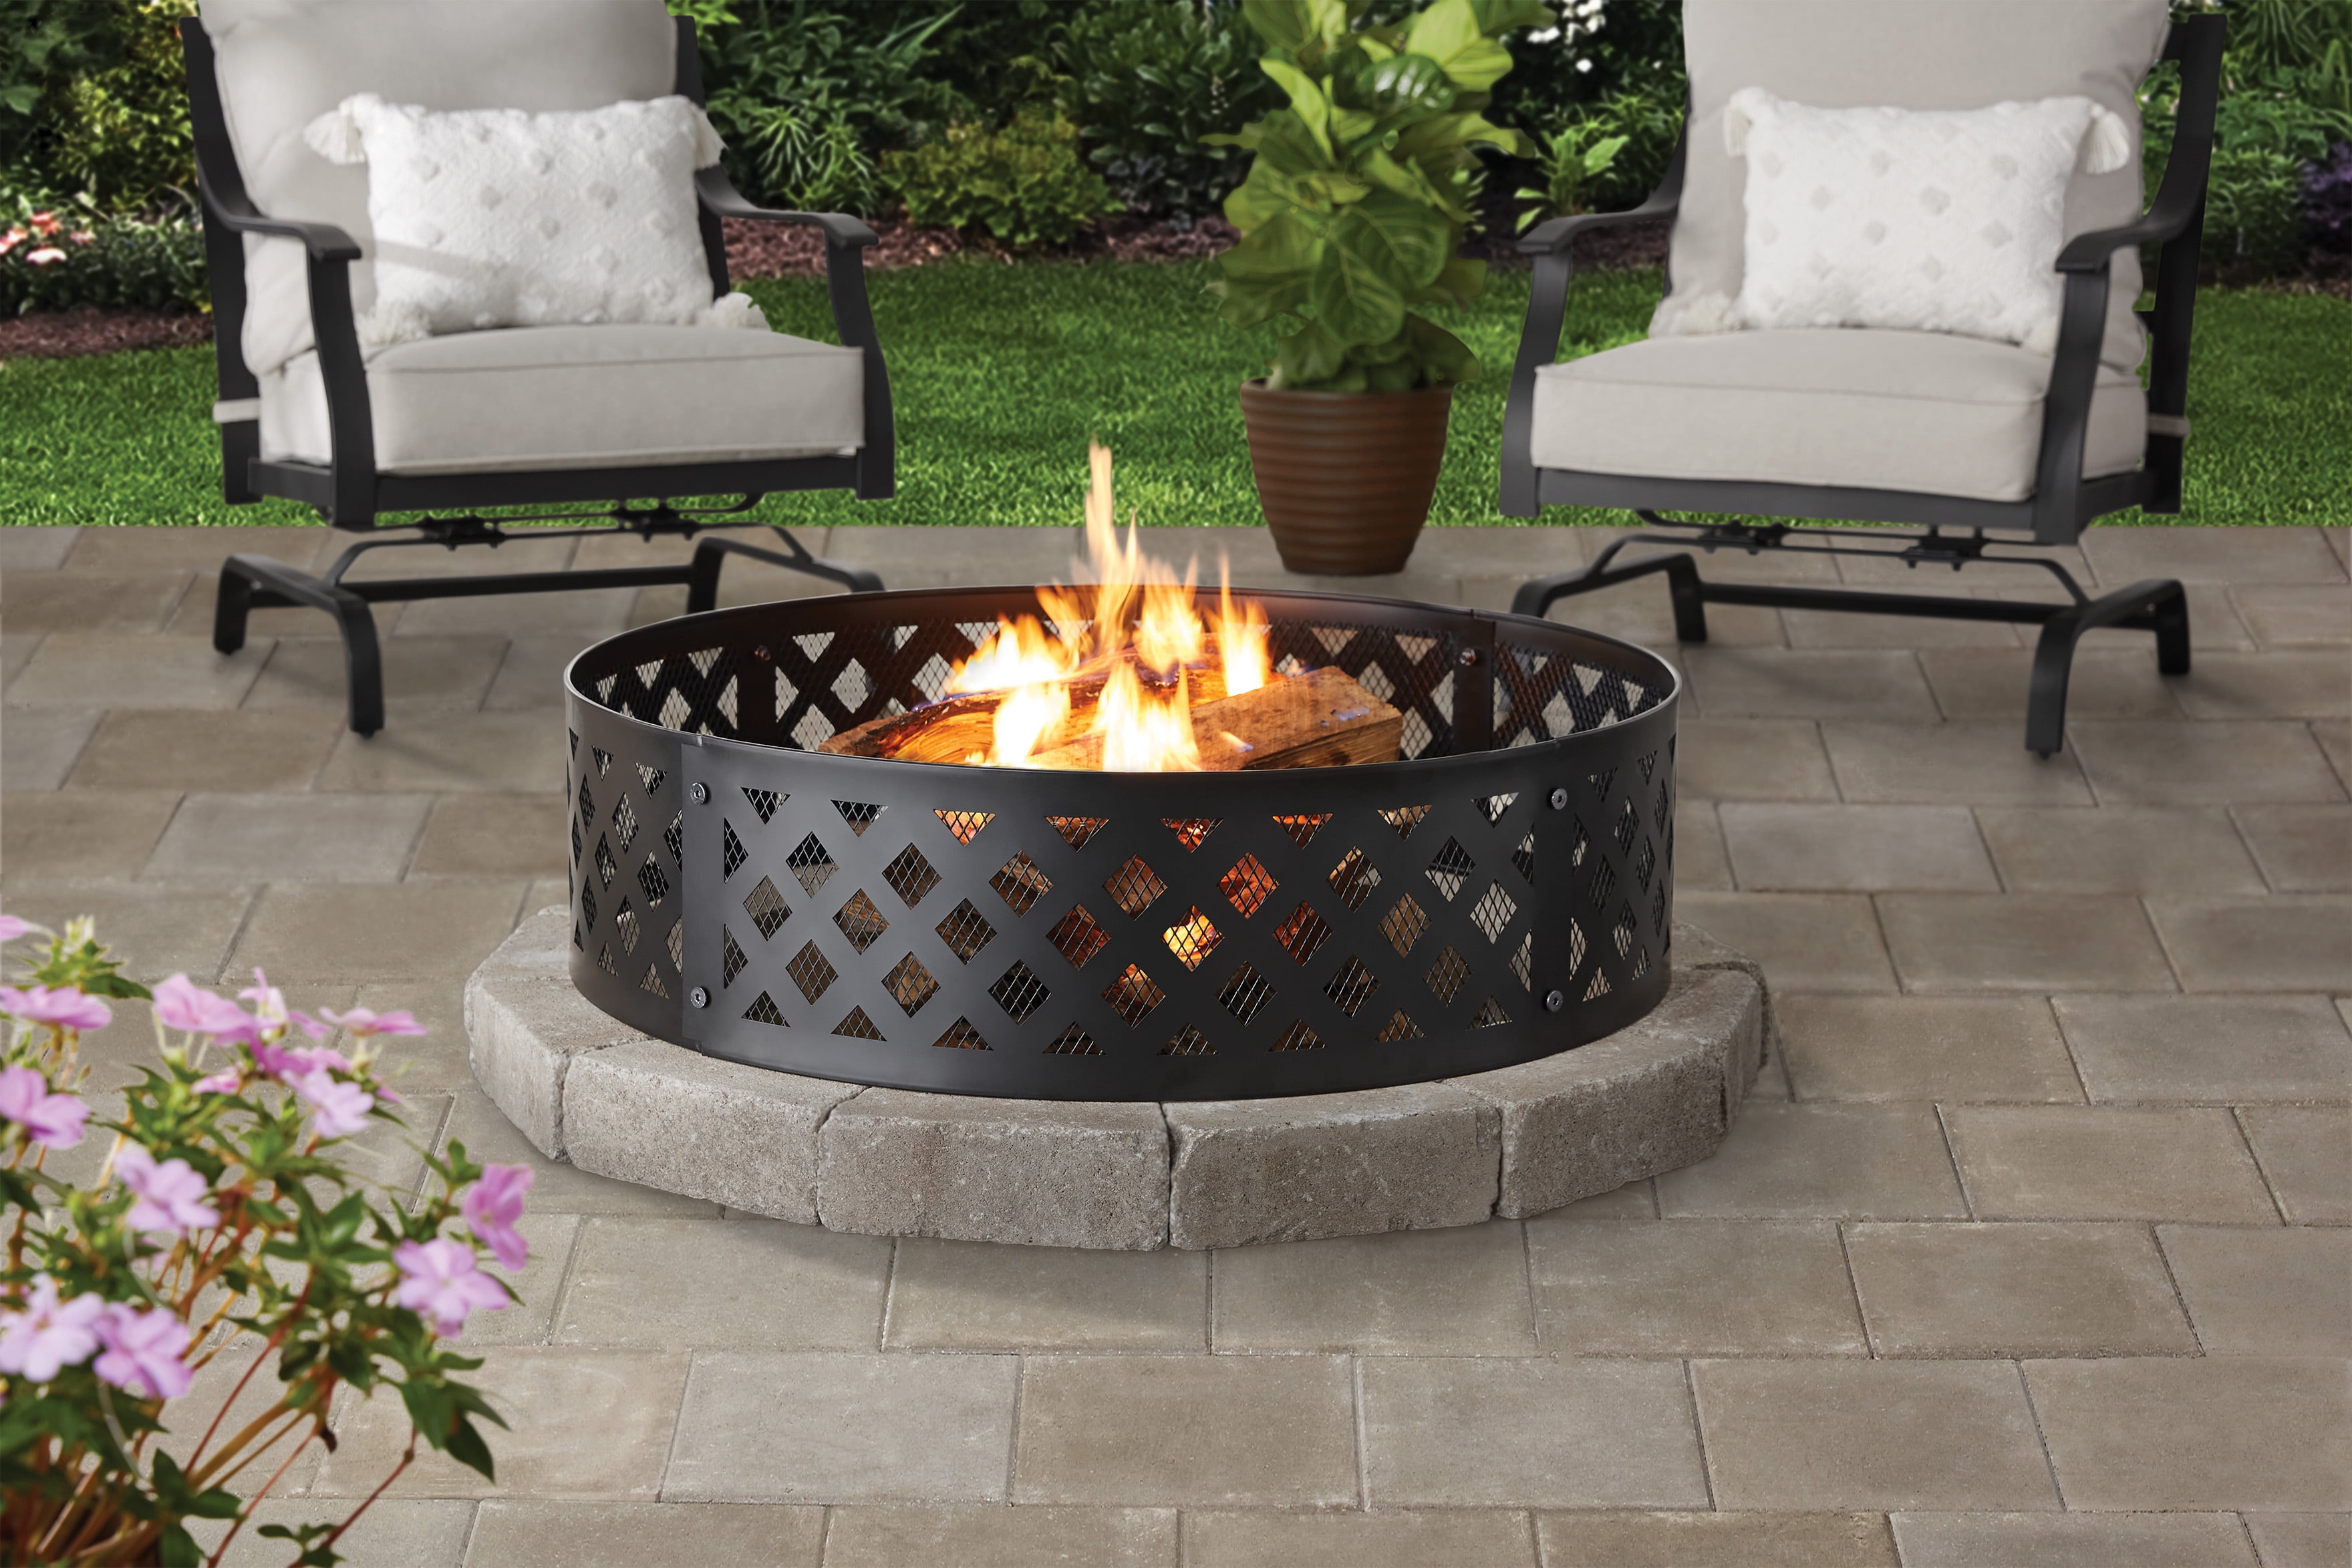 36" Round Metal and Steel Fire Ring, by Mainstays